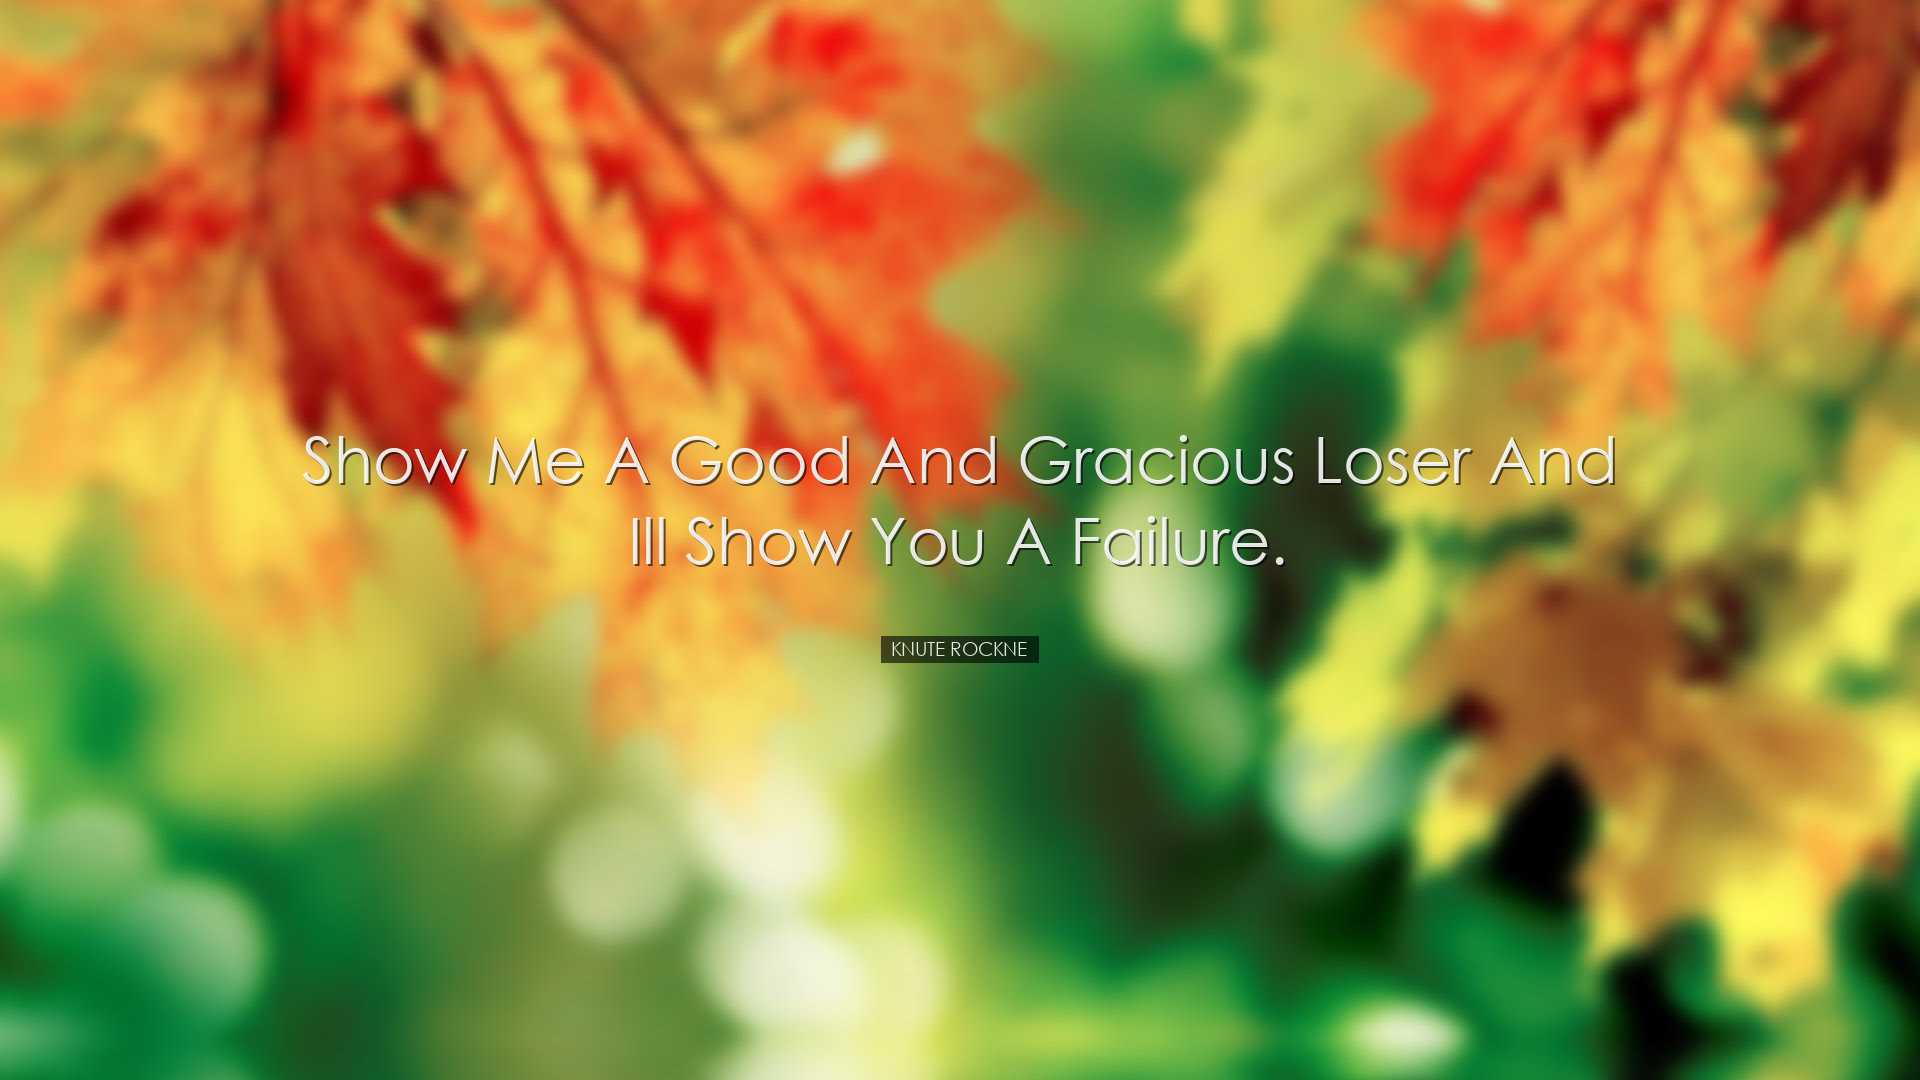 Show me a good and gracious loser and Ill show you a failure. - Kn